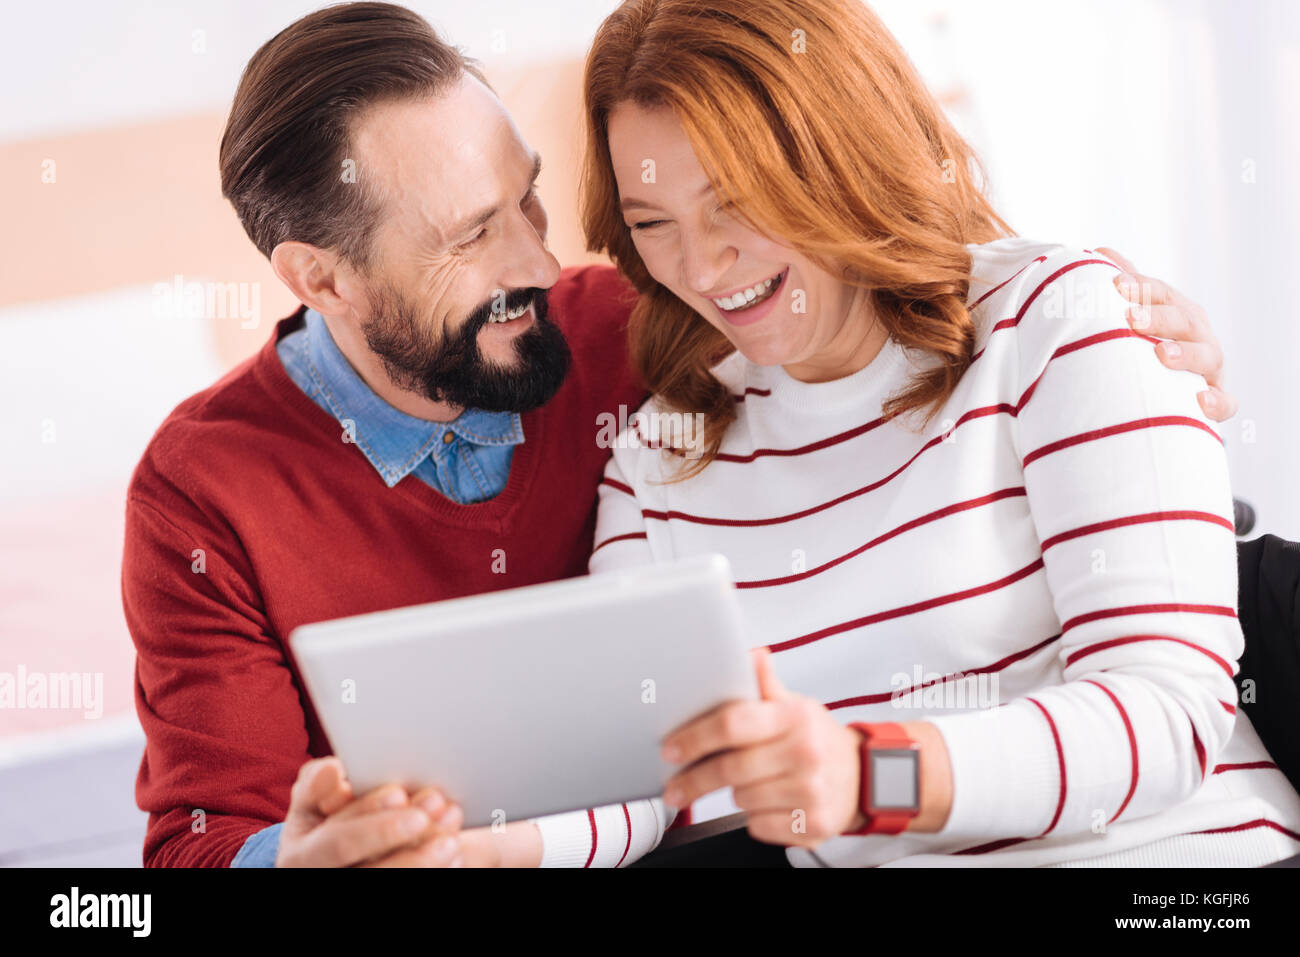 Pleased man and woman laughing while using a tablet Stock Photo